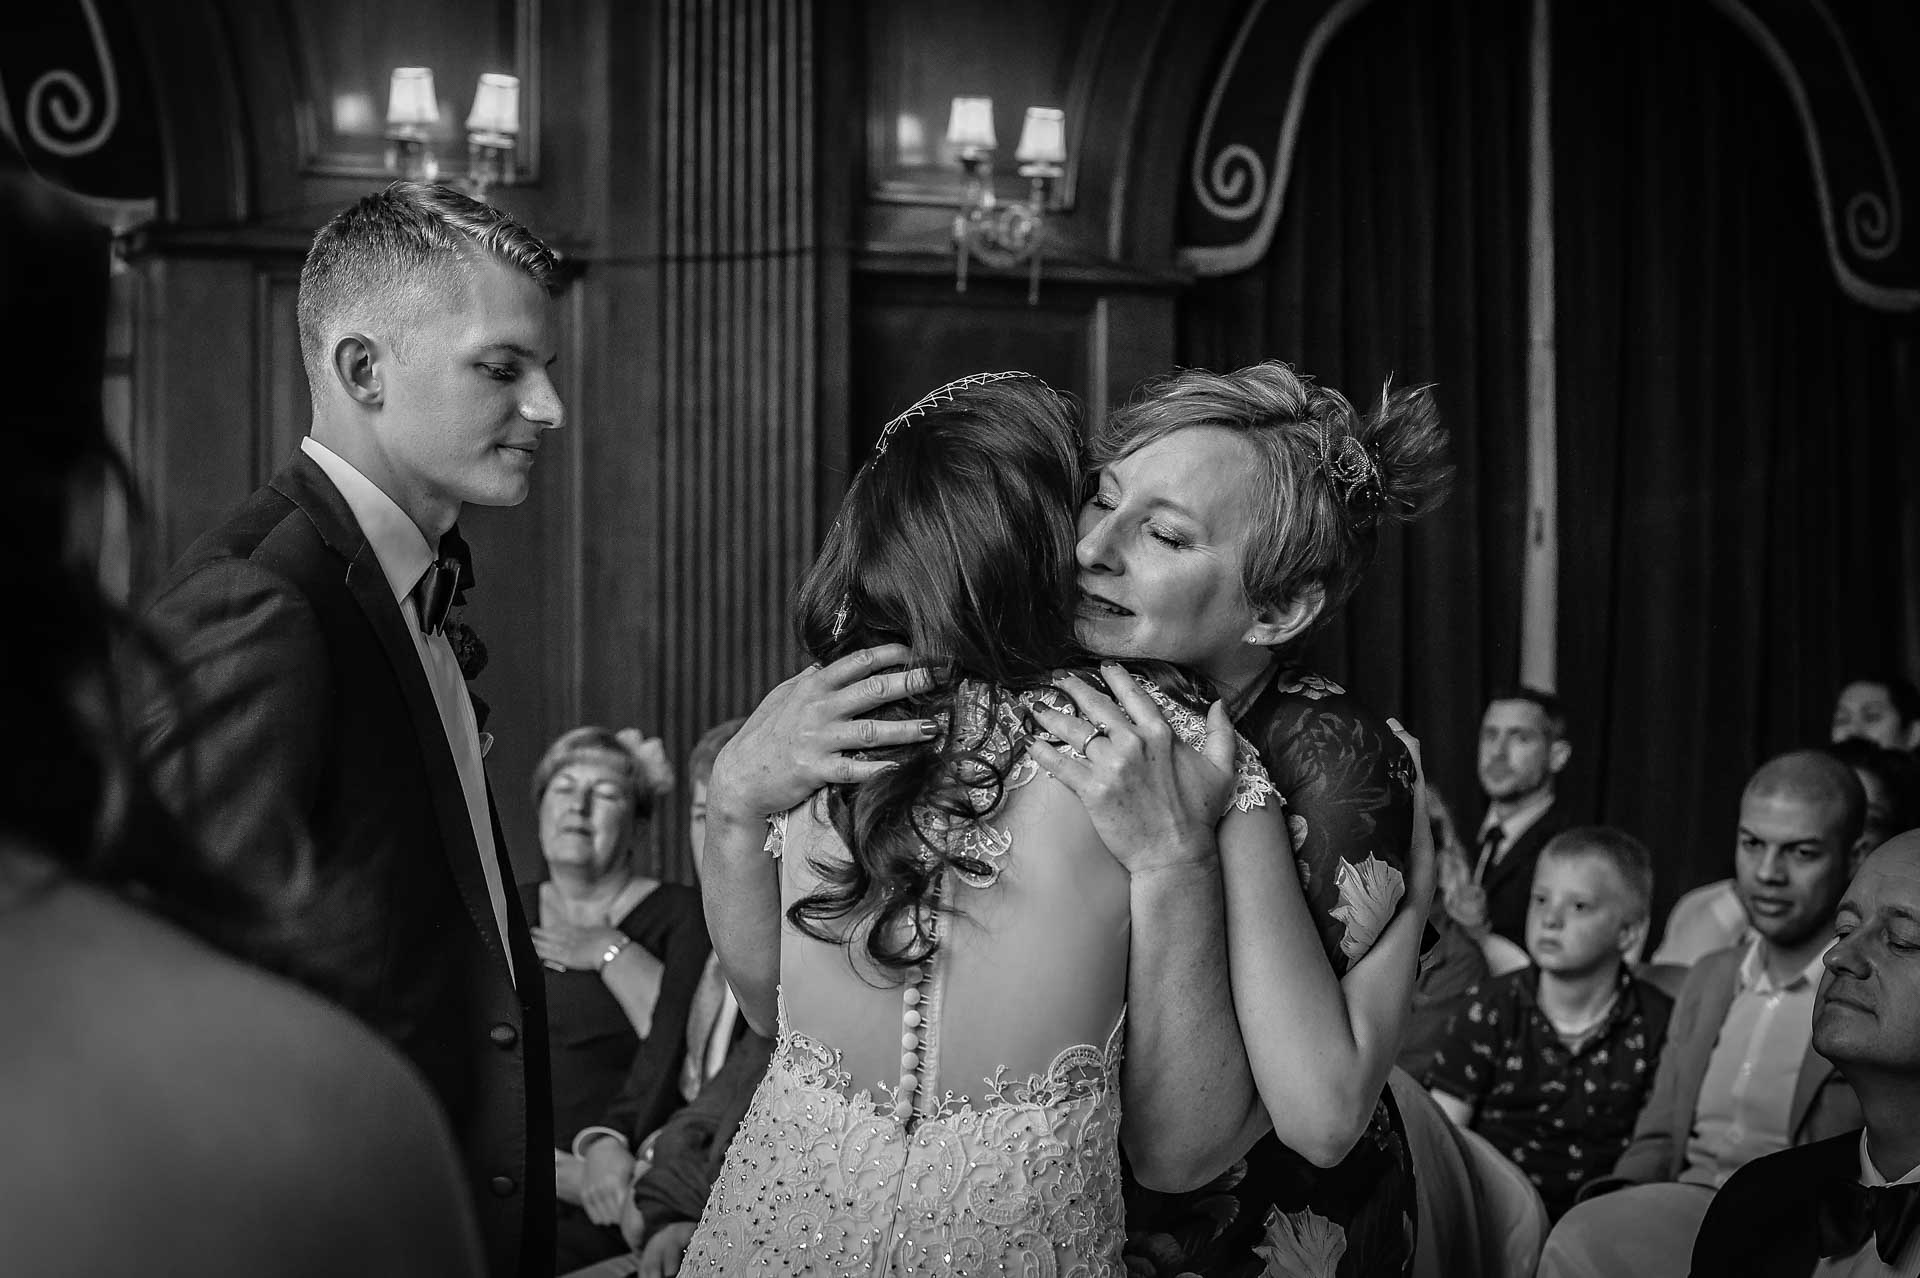 Family Hug at Porchester Hall Marriage